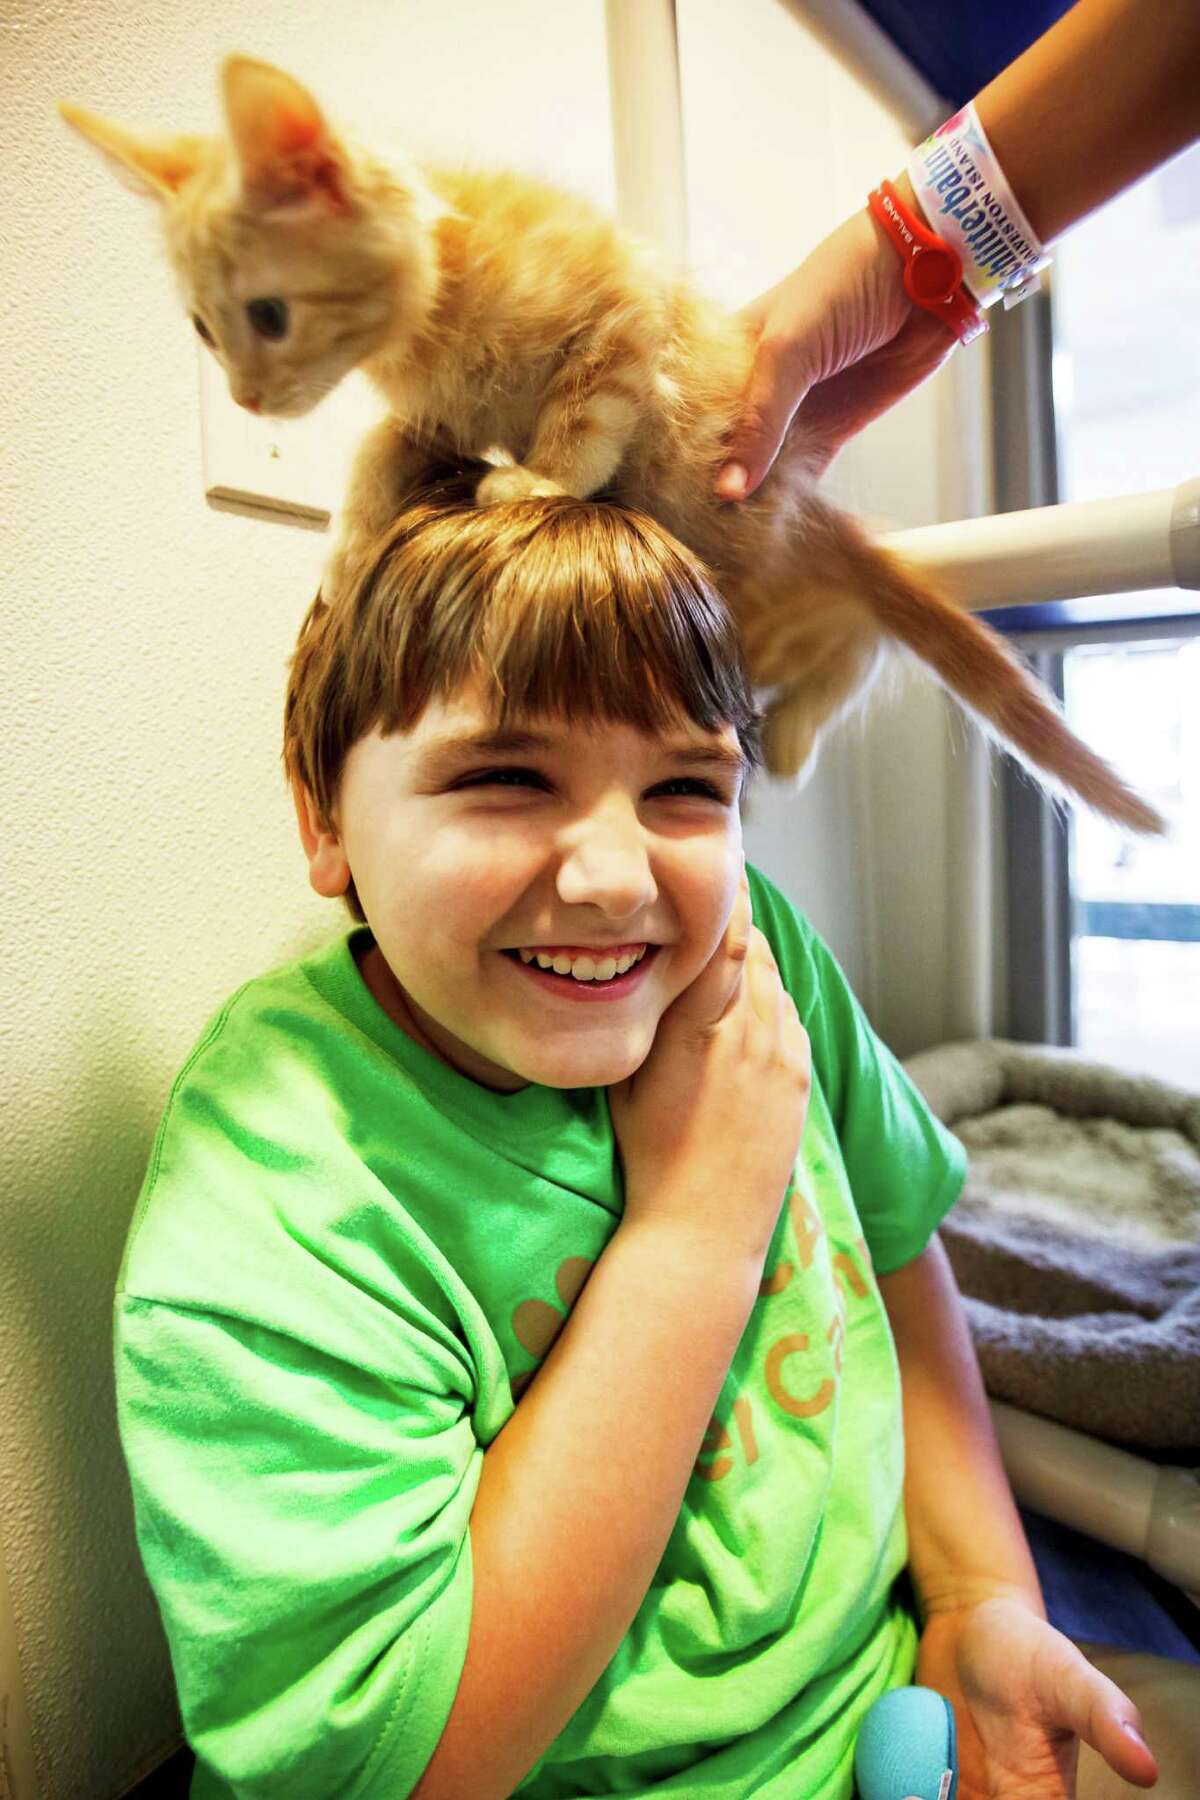 Isaac Durbin, 10, reacts as Adam Lennard, 12, puts a 2-month-old Tabby named Frack on his head during the Houston SPCA Critter Camp, Tuesday, June 5, 2012, in Houston.